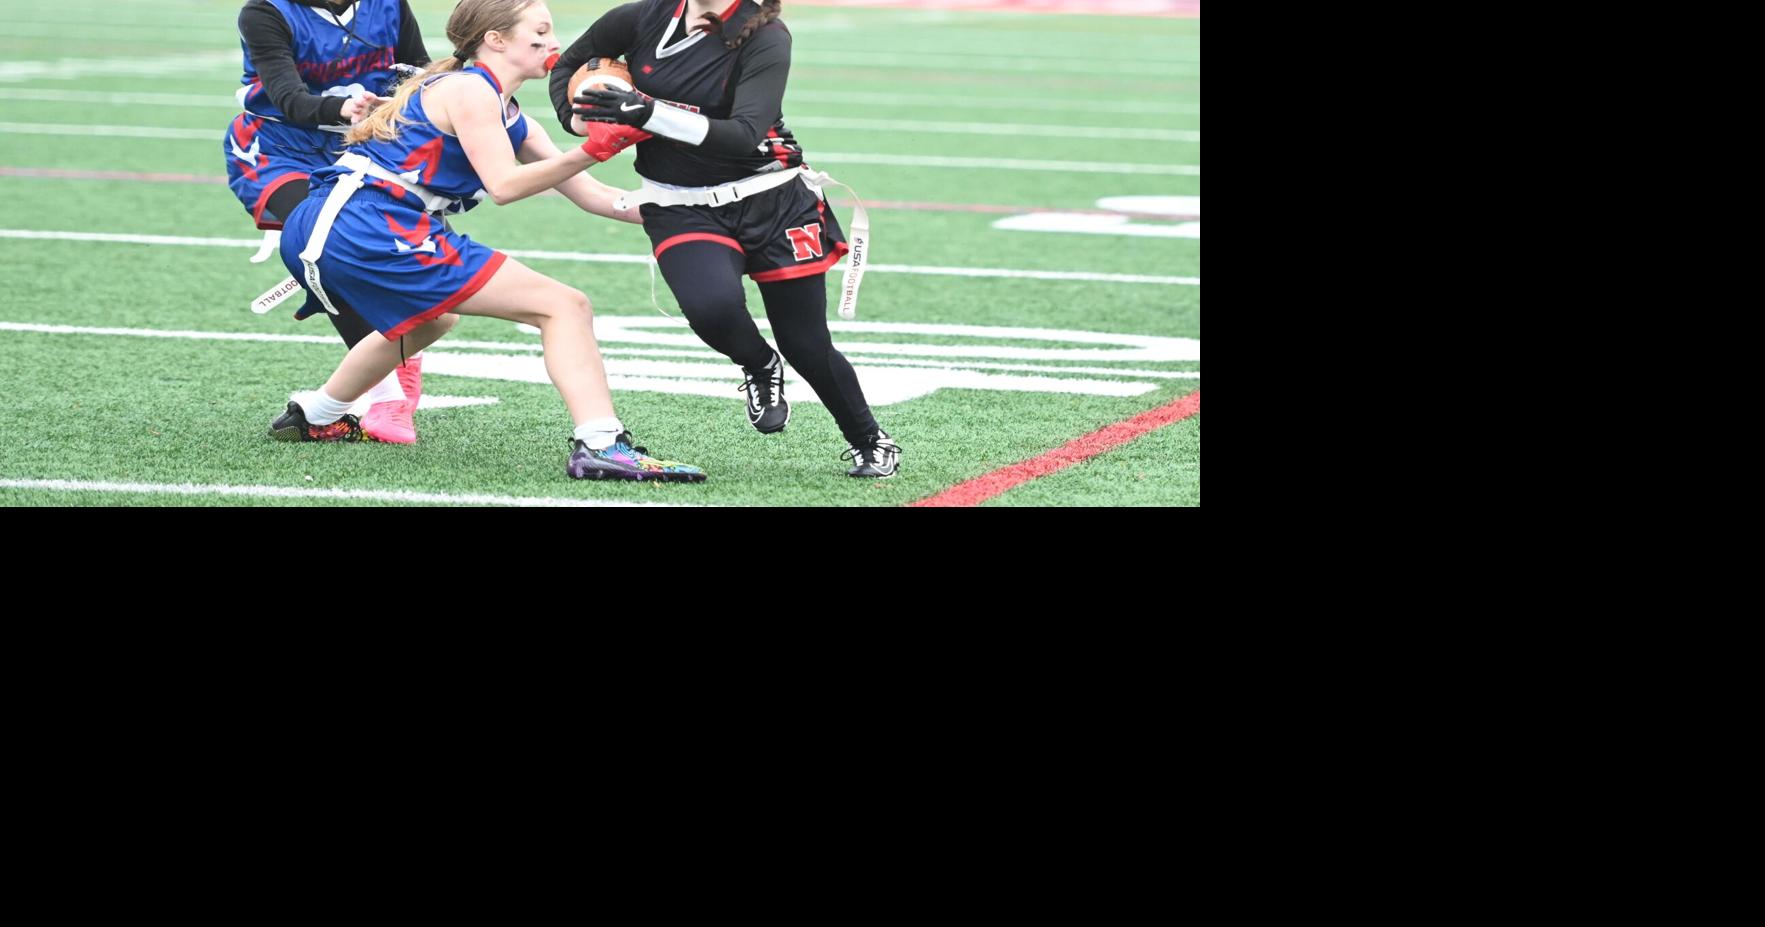 Niskayuna dominates Schenectady with 34-6 victory in Section 2’s flag football season opener